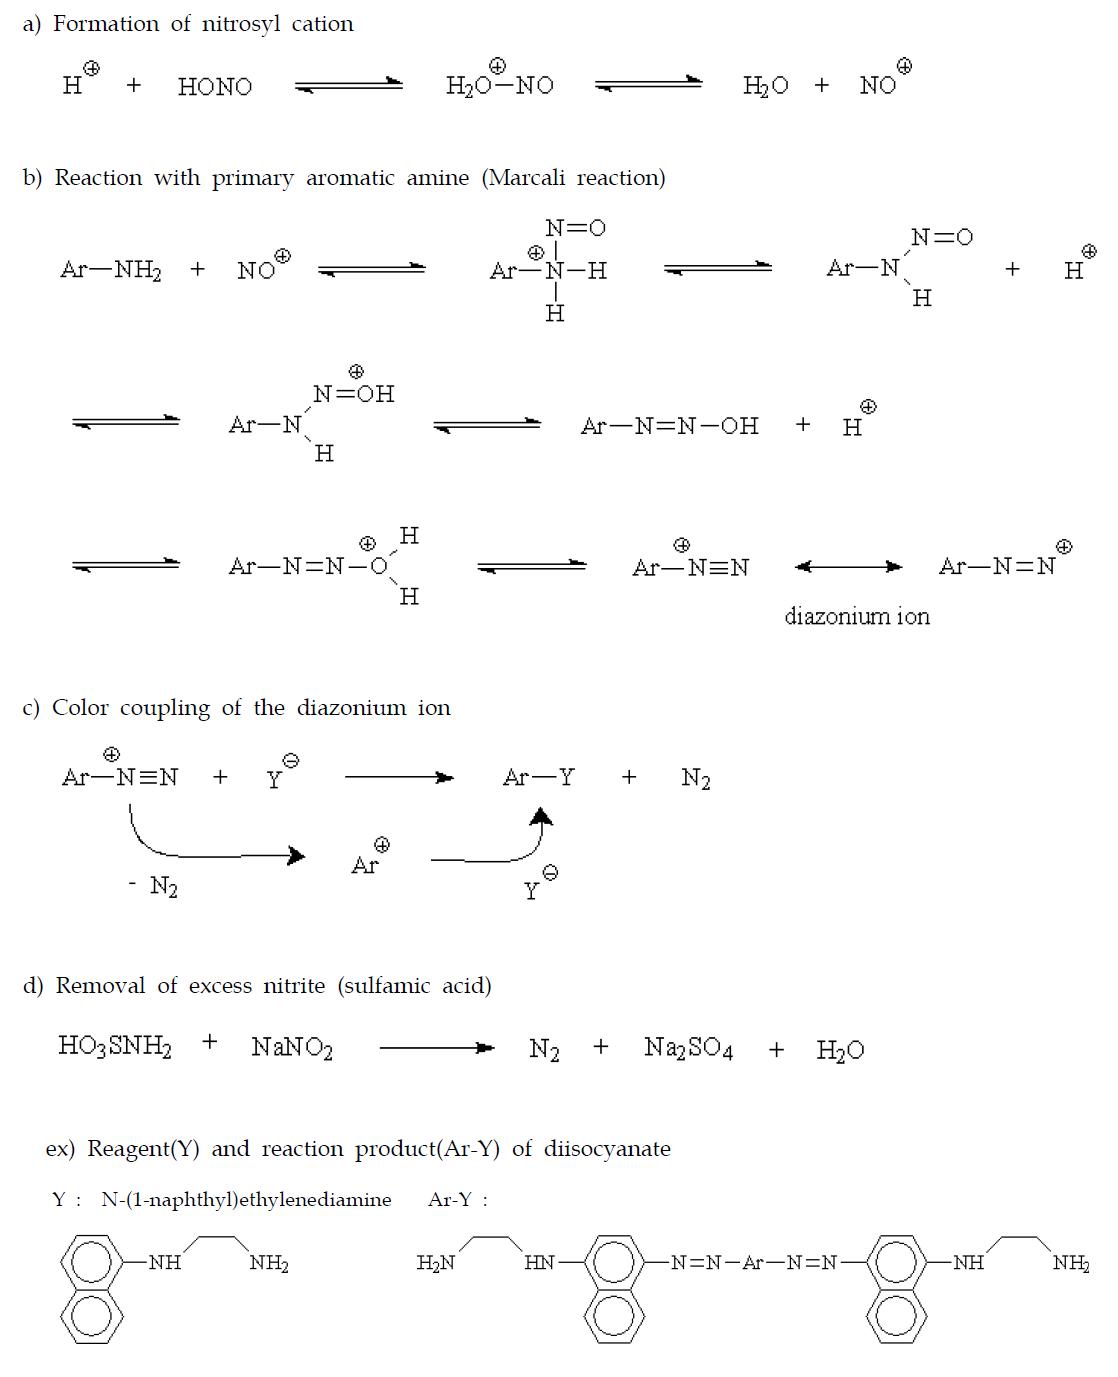 Mechanism of diazotization reaction, useful intermediate for preparation of substituted benzene derivatives